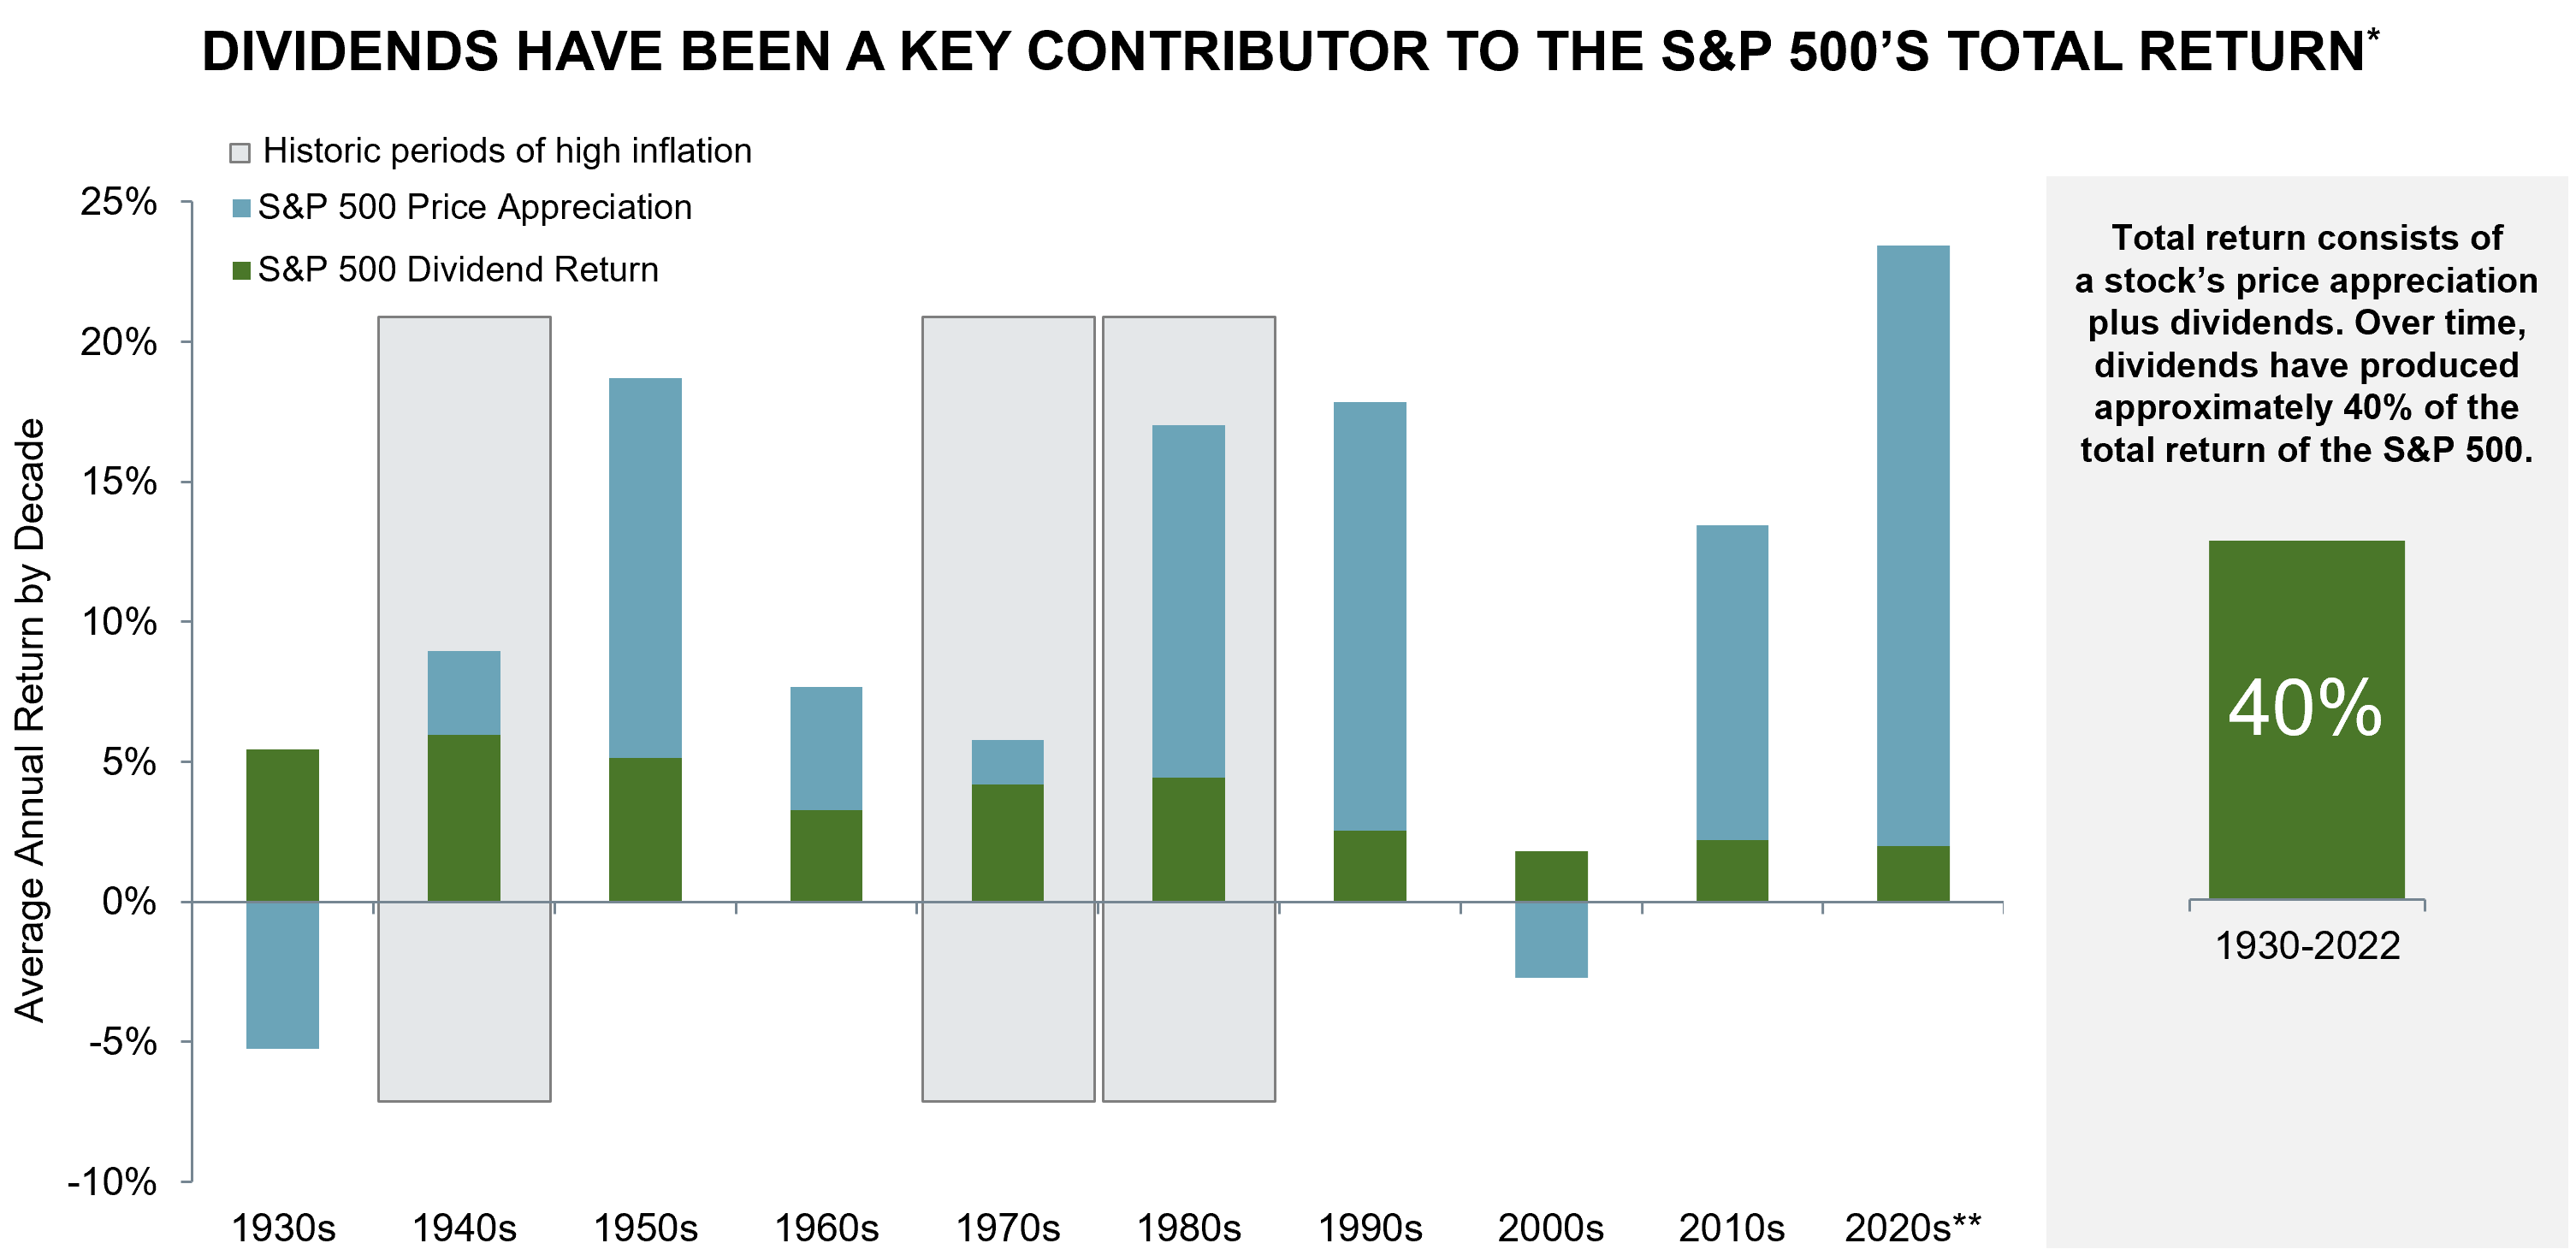 Bar chart depicts the role that dividends have played in the S&P 500 Index's total return on a decade-by-decade basis, starting with the decade beginning in 1930 and ending in the decade beginning in 2020. Individual bars represent, in order, the index's total return, the role that dividends played in that return, and the role that price appreciation played in that return. During different decades, dividend return, and price appreciation played different roles in the index's total return. Between the years 1930 and 2022 dividends produced approximately 40% of the S&P 500 index's return. Gray bars highlighting the decades of 1940s, 1970s and 1980s represent historic periods of inflation. 